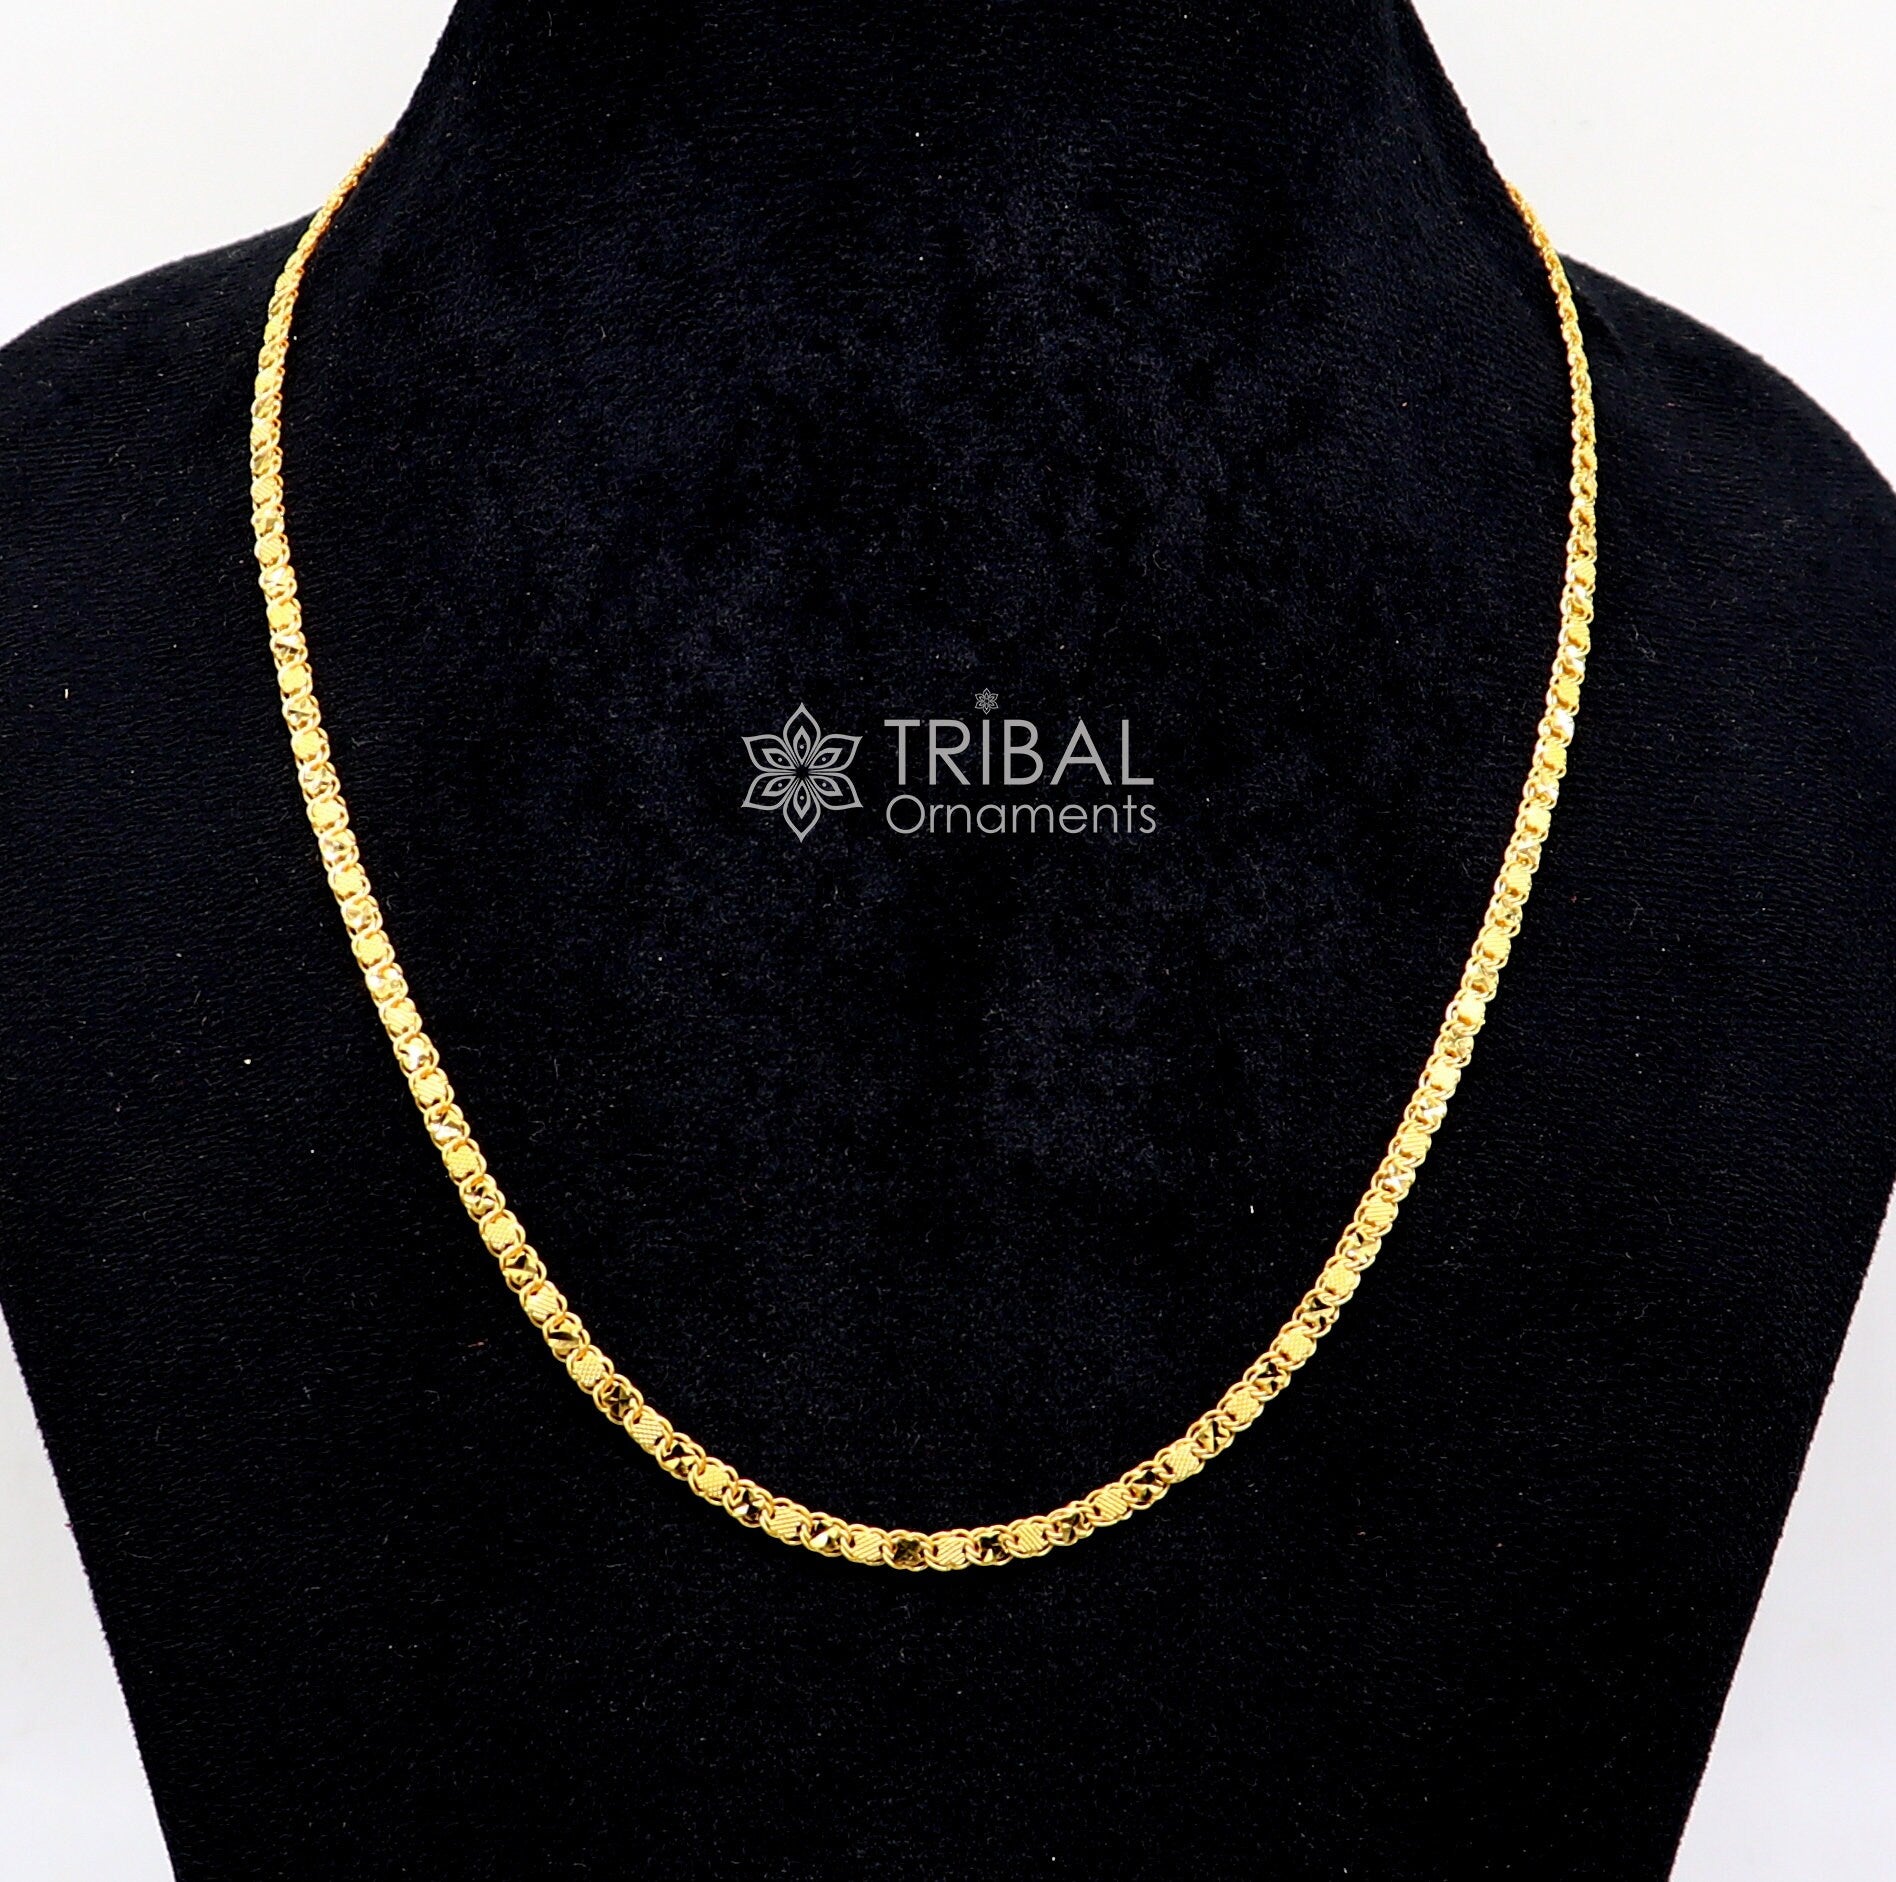 3mm solid 22kt yellow gold royal handmade chain fabulous design delicate unisex gifting chain necklace best trendy design jewelry gch575 - TRIBAL ORNAMENTS